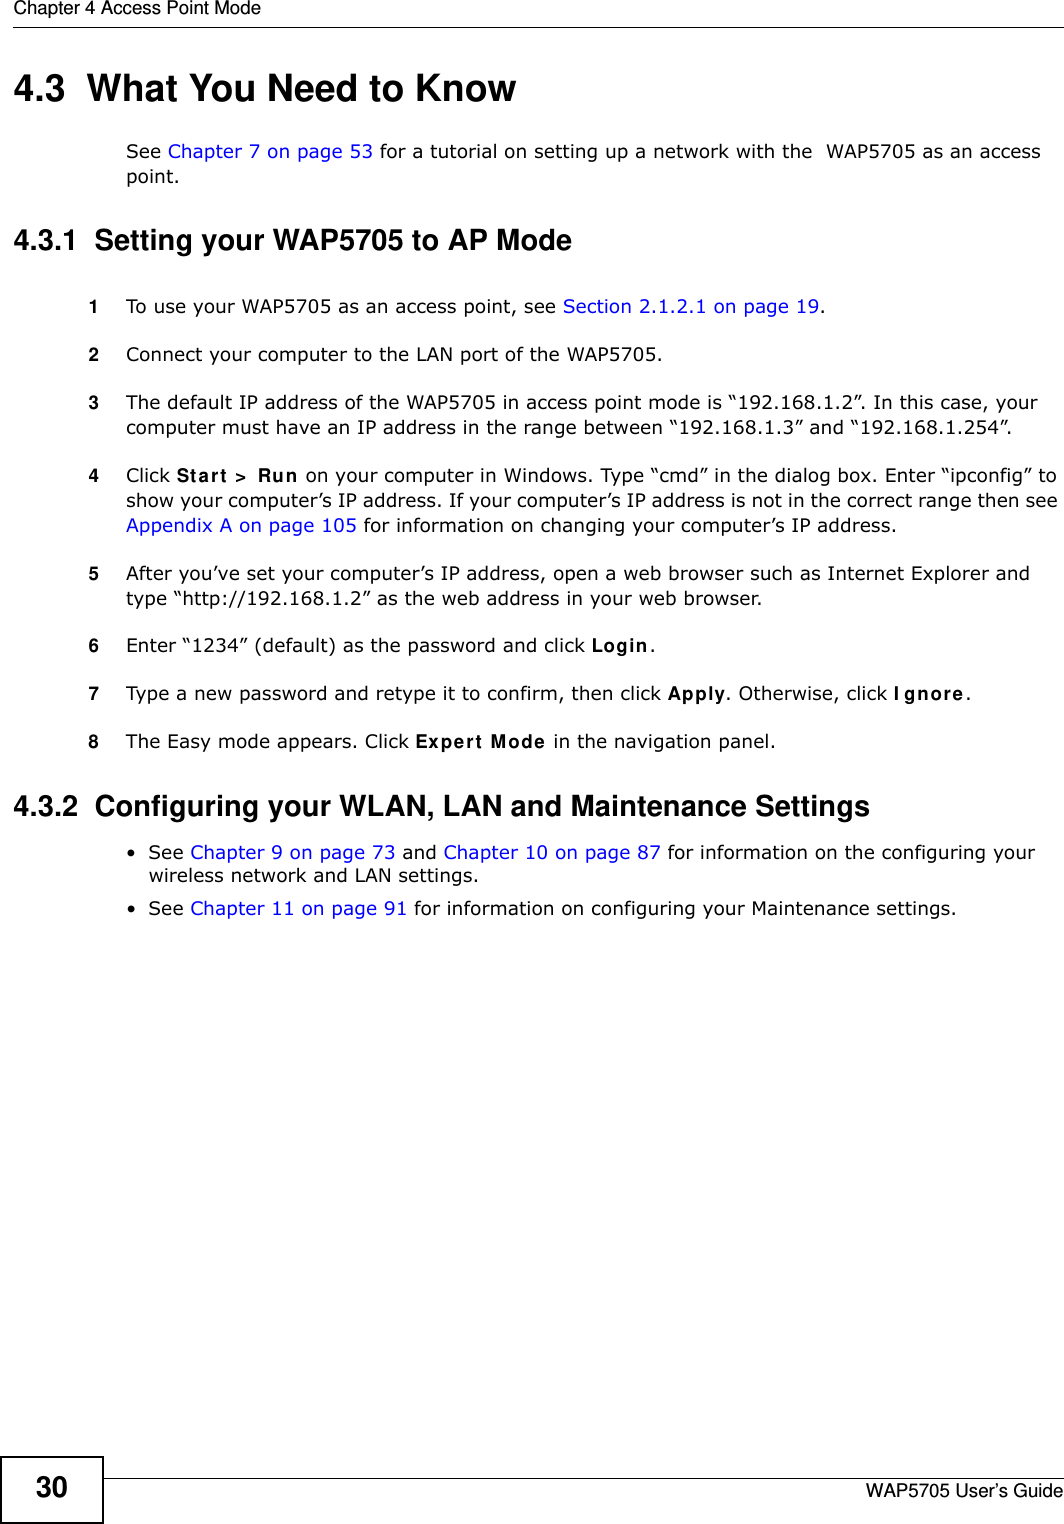 Chapter 4 Access Point ModeWAP5705 User’s Guide304.3  What You Need to KnowSee Chapter 7 on page 53 for a tutorial on setting up a network with the  WAP5705 as an access point.4.3.1  Setting your WAP5705 to AP Mode1To use your WAP5705 as an access point, see Section 2.1.2.1 on page 19.2Connect your computer to the LAN port of the WAP5705. 3The default IP address of the WAP5705 in access point mode is “192.168.1.2”. In this case, your computer must have an IP address in the range between “192.168.1.3” and “192.168.1.254”.4Click St a r t  &gt;  Run  on your computer in Windows. Type “cmd” in the dialog box. Enter “ipconfig” to show your computer’s IP address. If your computer’s IP address is not in the correct range then see Appendix A on page 105 for information on changing your computer’s IP address.5After you’ve set your computer’s IP address, open a web browser such as Internet Explorer and type “http://192.168.1.2” as the web address in your web browser.6Enter “1234” (default) as the password and click Login.7Type a new password and retype it to confirm, then click Apply. Otherwise, click I gn ore.8The Easy mode appears. Click Expert  Mode in the navigation panel.4.3.2  Configuring your WLAN, LAN and Maintenance Settings•See Chapter 9 on page 73 and Chapter 10 on page 87 for information on the configuring your wireless network and LAN settings.•See Chapter 11 on page 91 for information on configuring your Maintenance settings. 